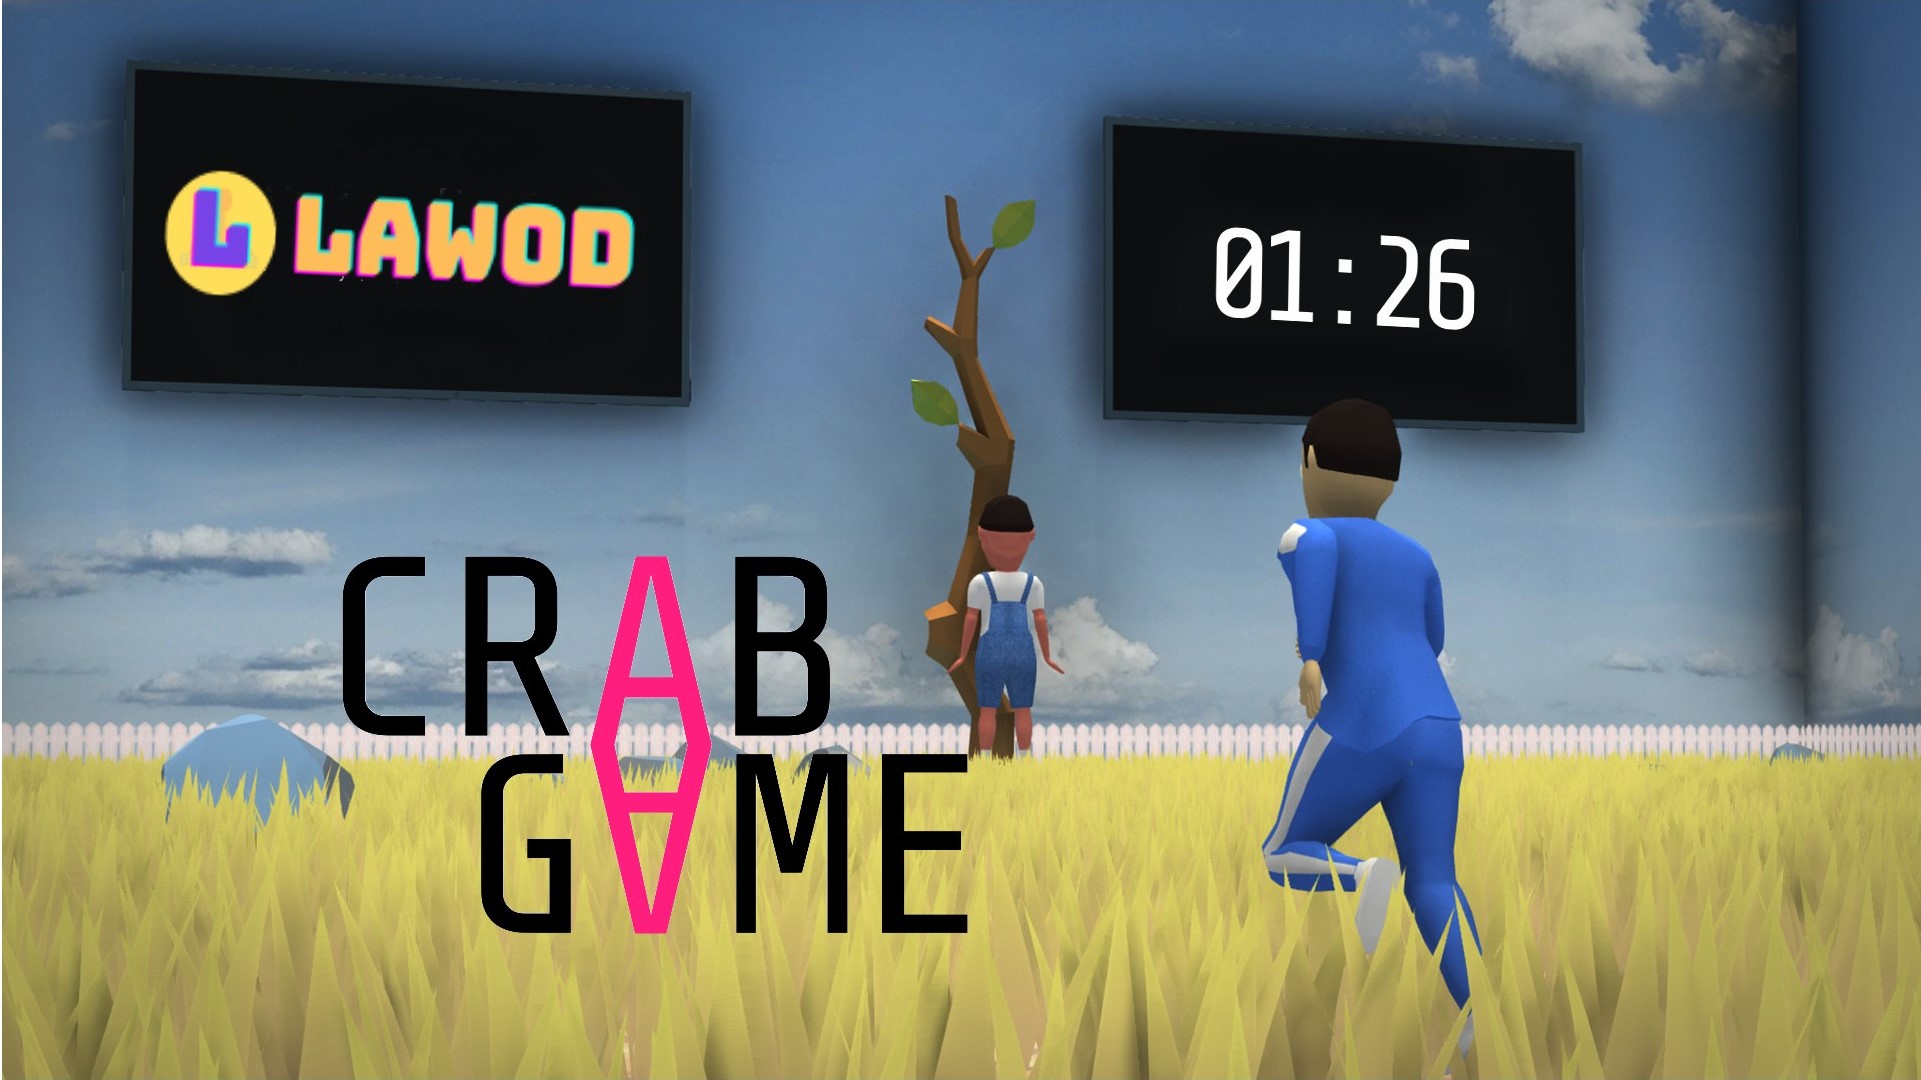 Crab Game Play Squid Game With Your Friends Lawod